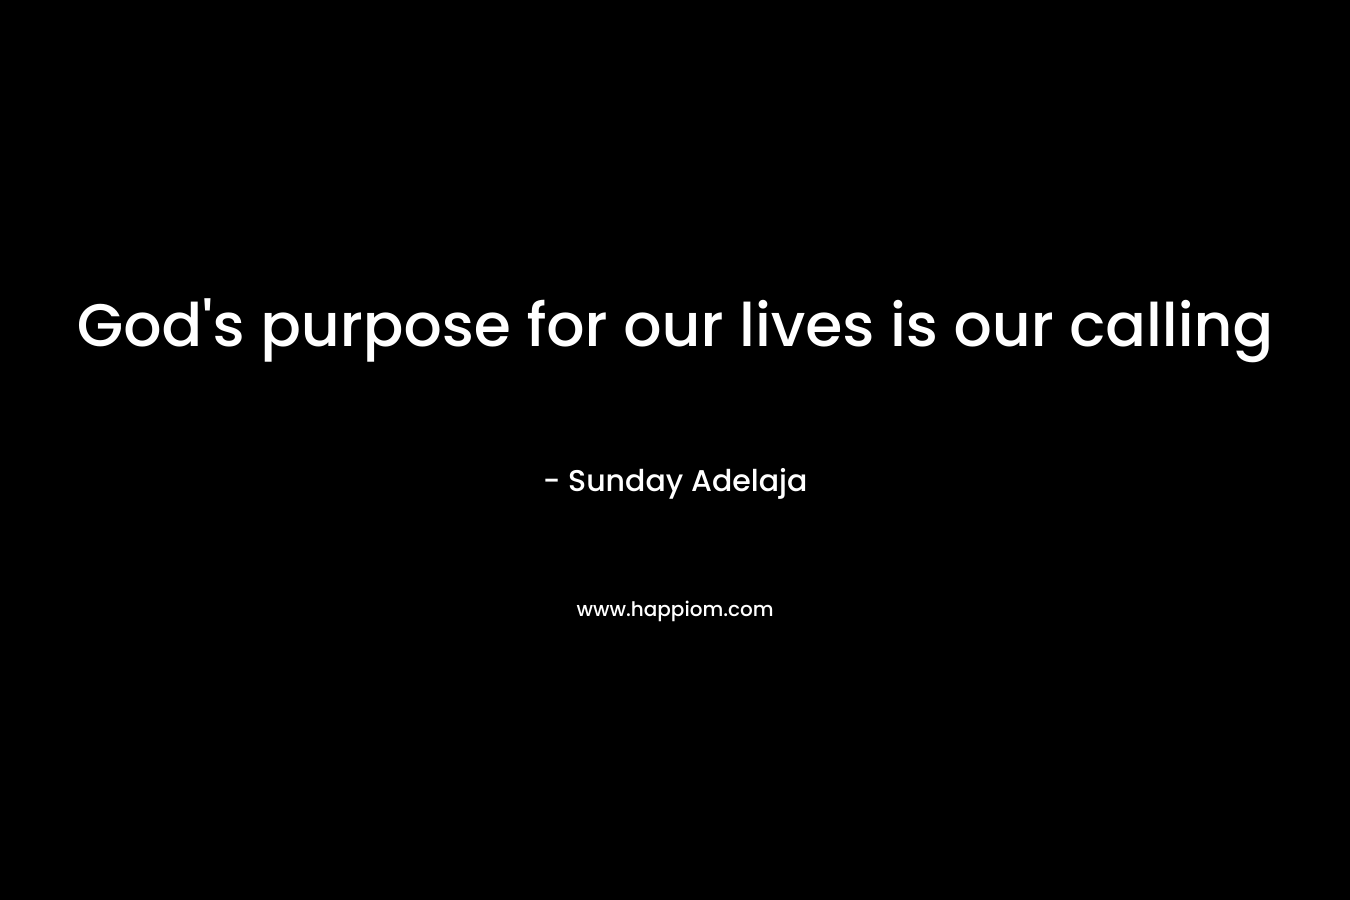 God's purpose for our lives is our calling